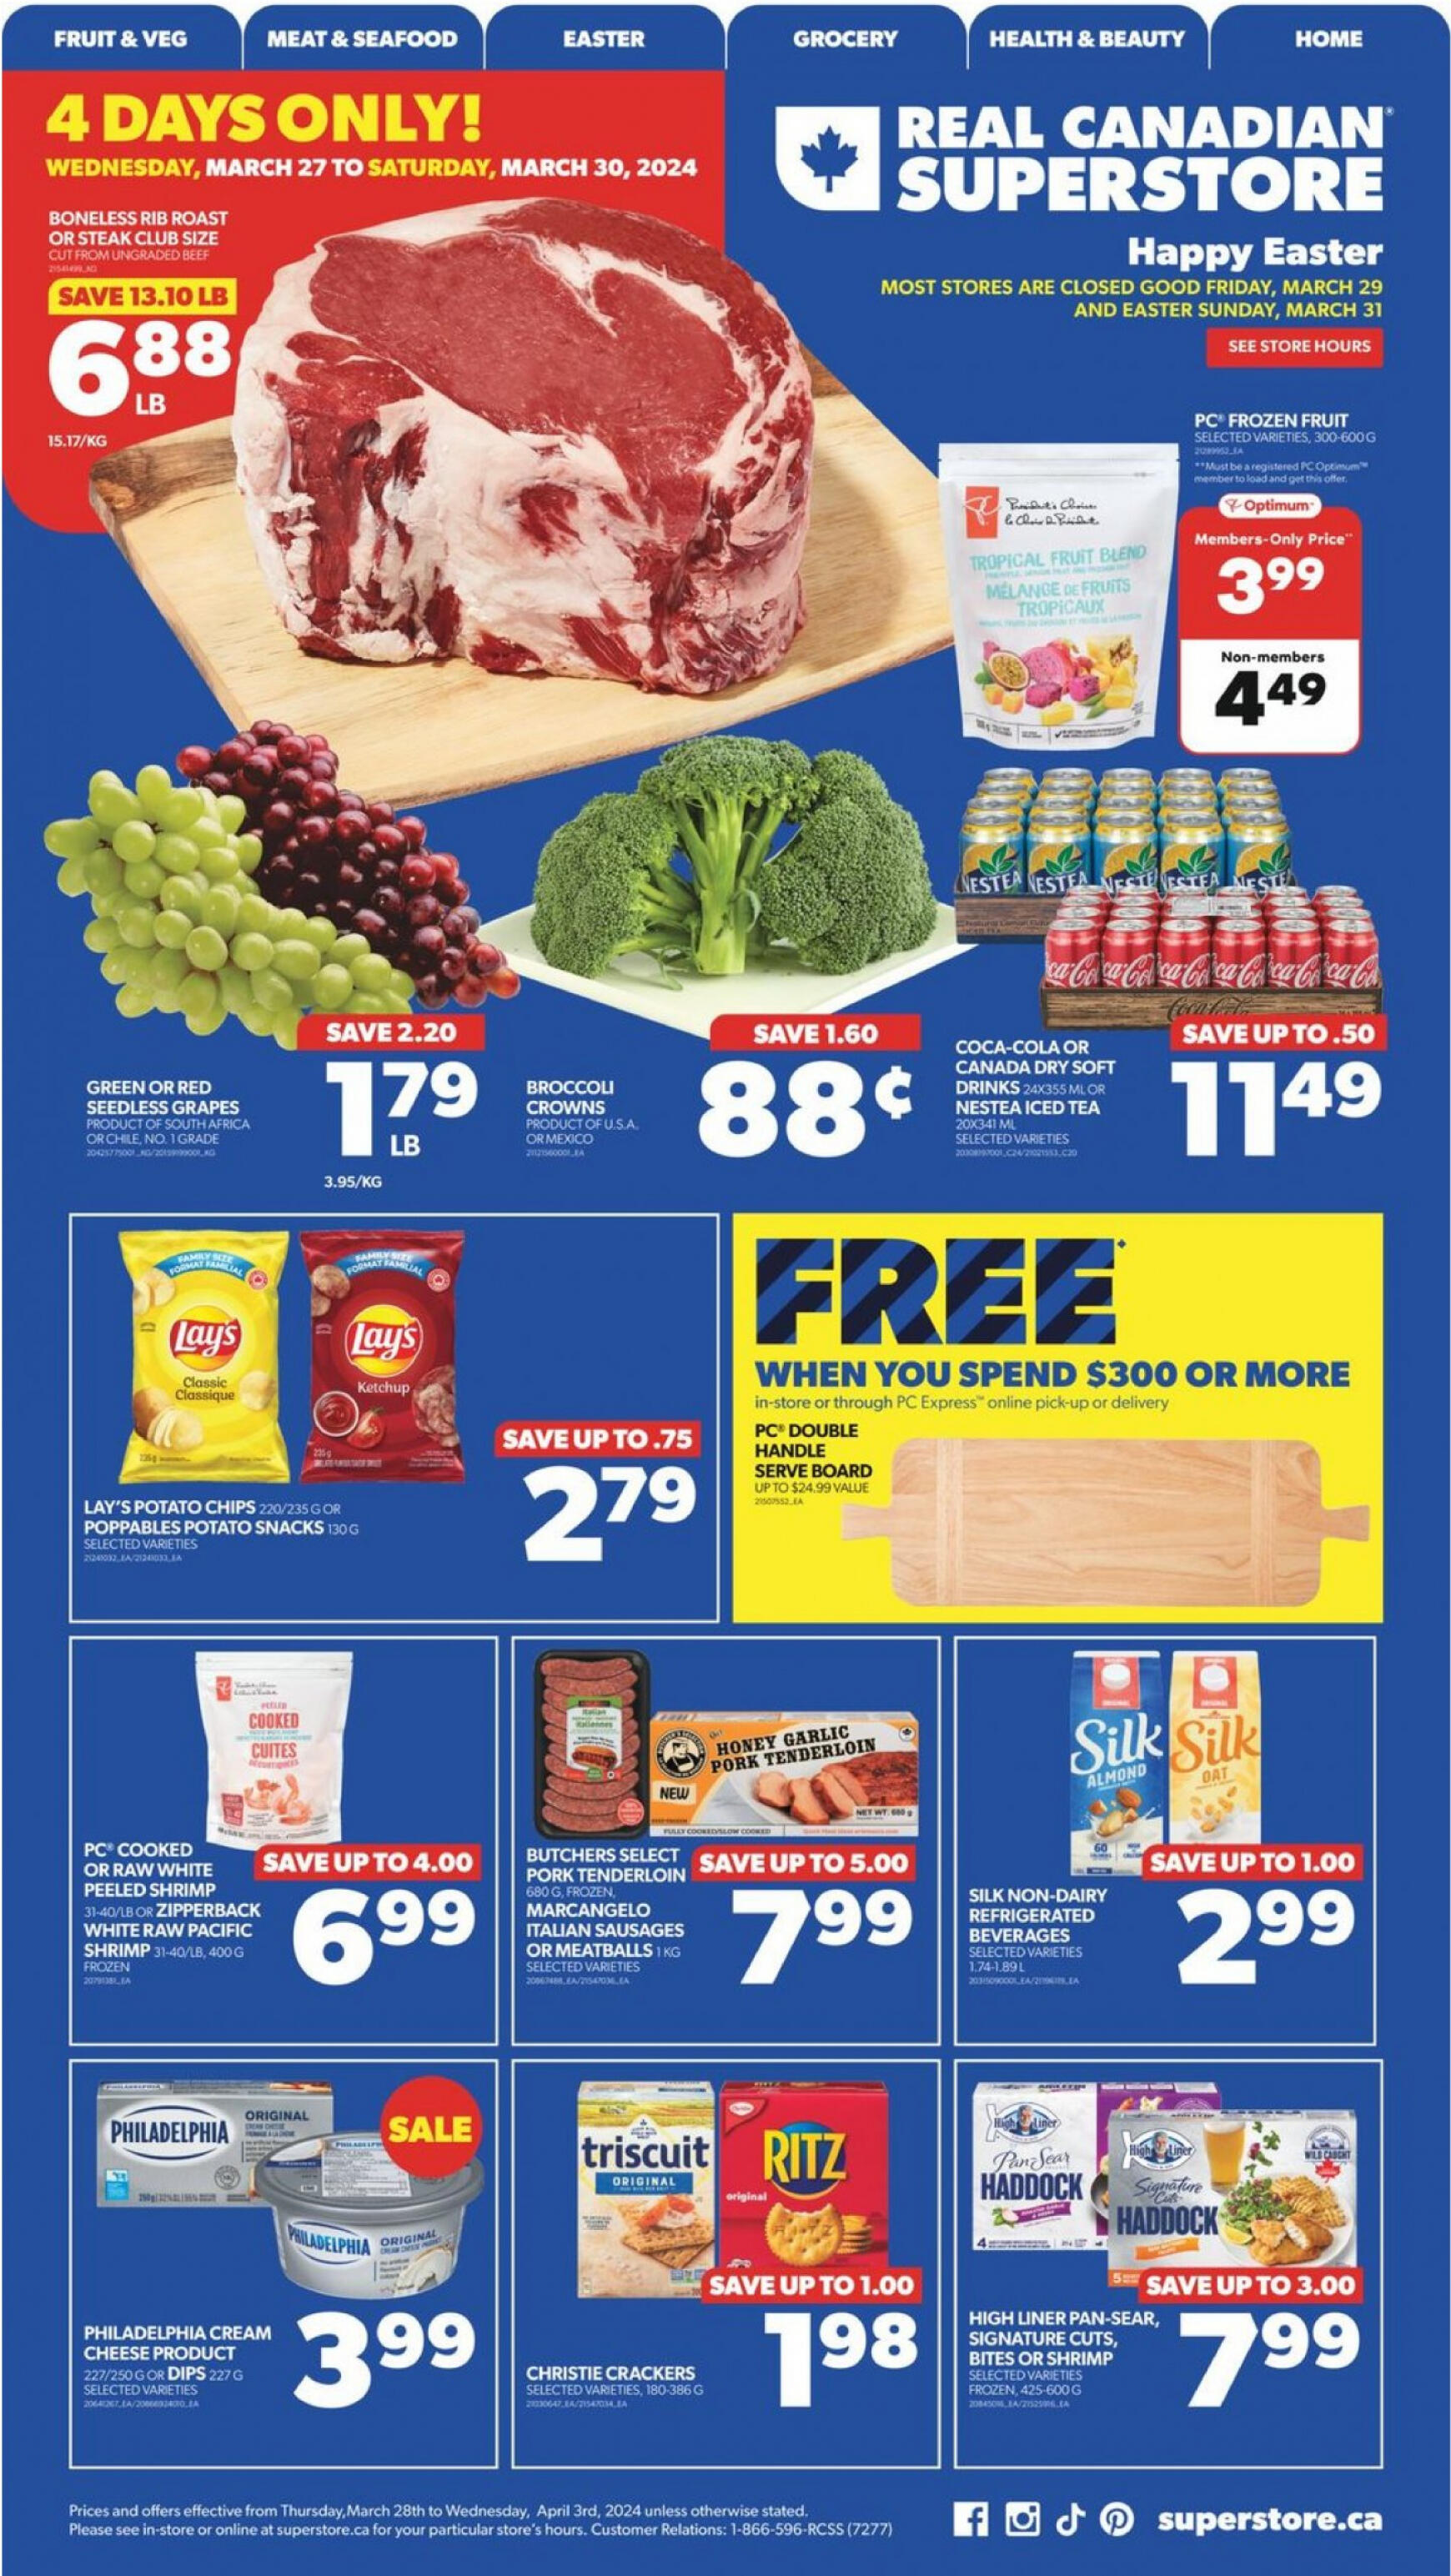 real-canadian-superstore - Real Canadian Superstore flyer current 28.03. - 03.04. - page: 3